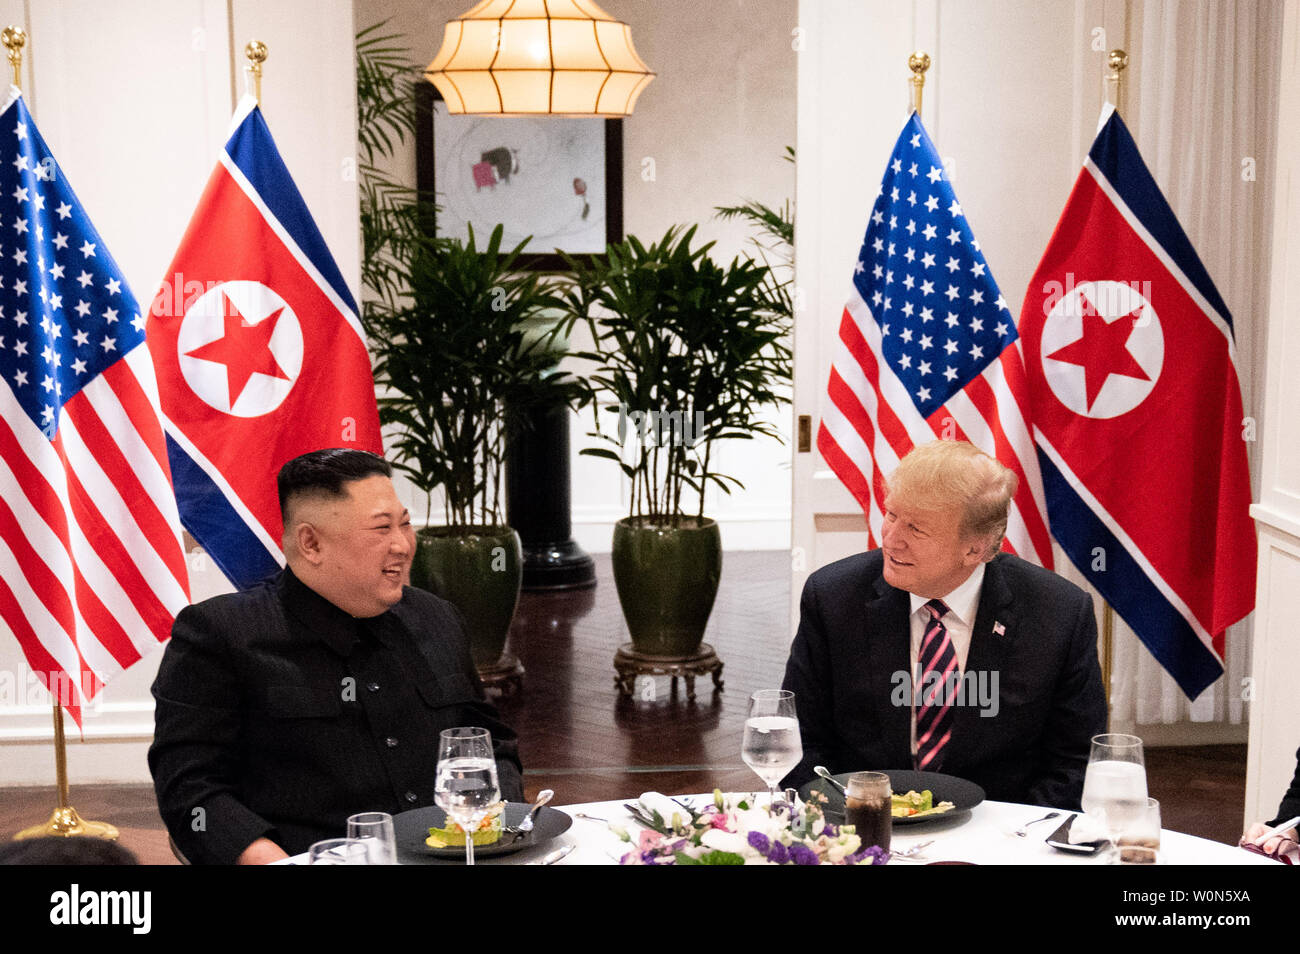 President Donald J. Trump and Kim Jong Un, Chairman of the State Affairs Commission of the Democratic People’s Republic of Korea meet for a social dinner, on February 27, 2019, at the Sofitel Legend Metropole hotel in Hanoi, for their second summit meeting. White House Photo by Shealah Craighead/UPI Stock Photo